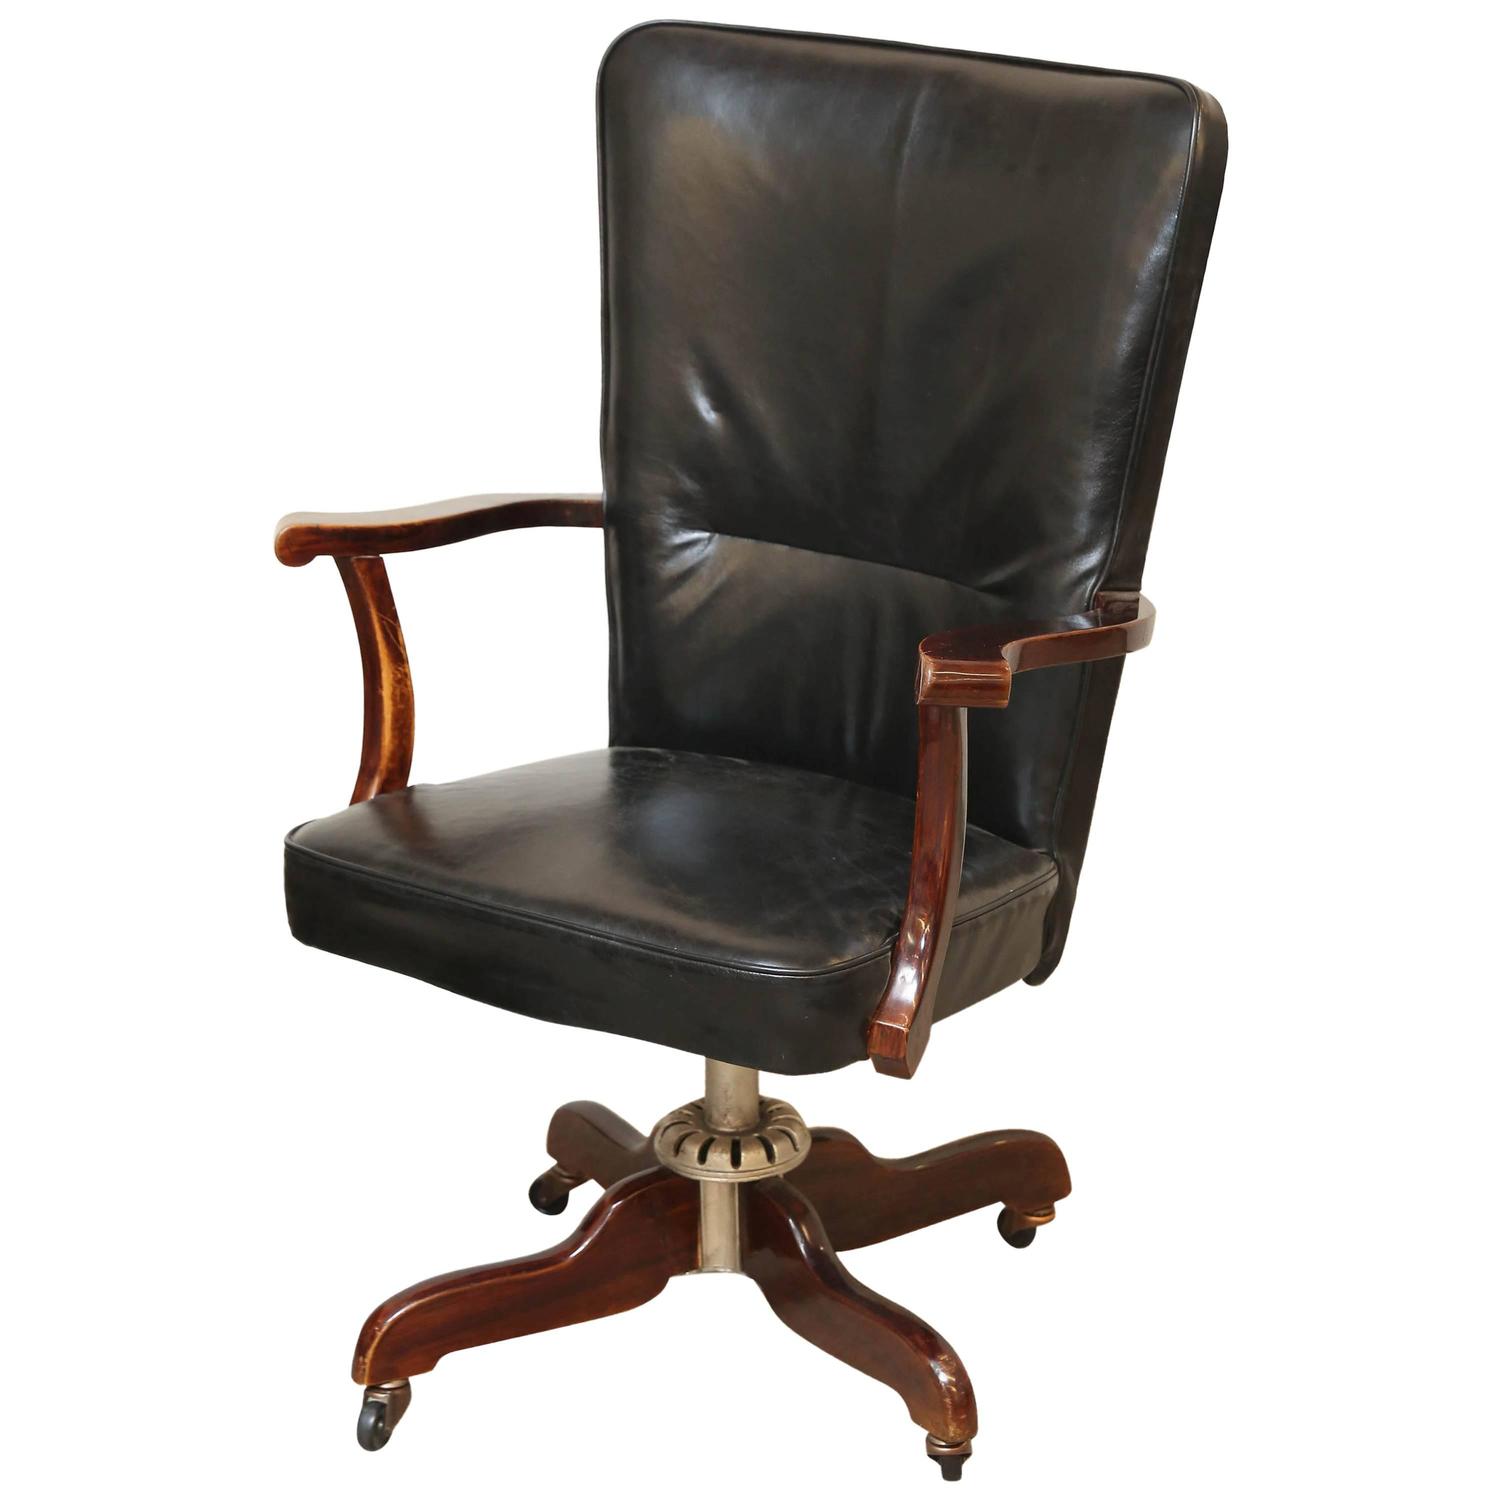 Art Deco Office Chair For Sale at 1stdibs